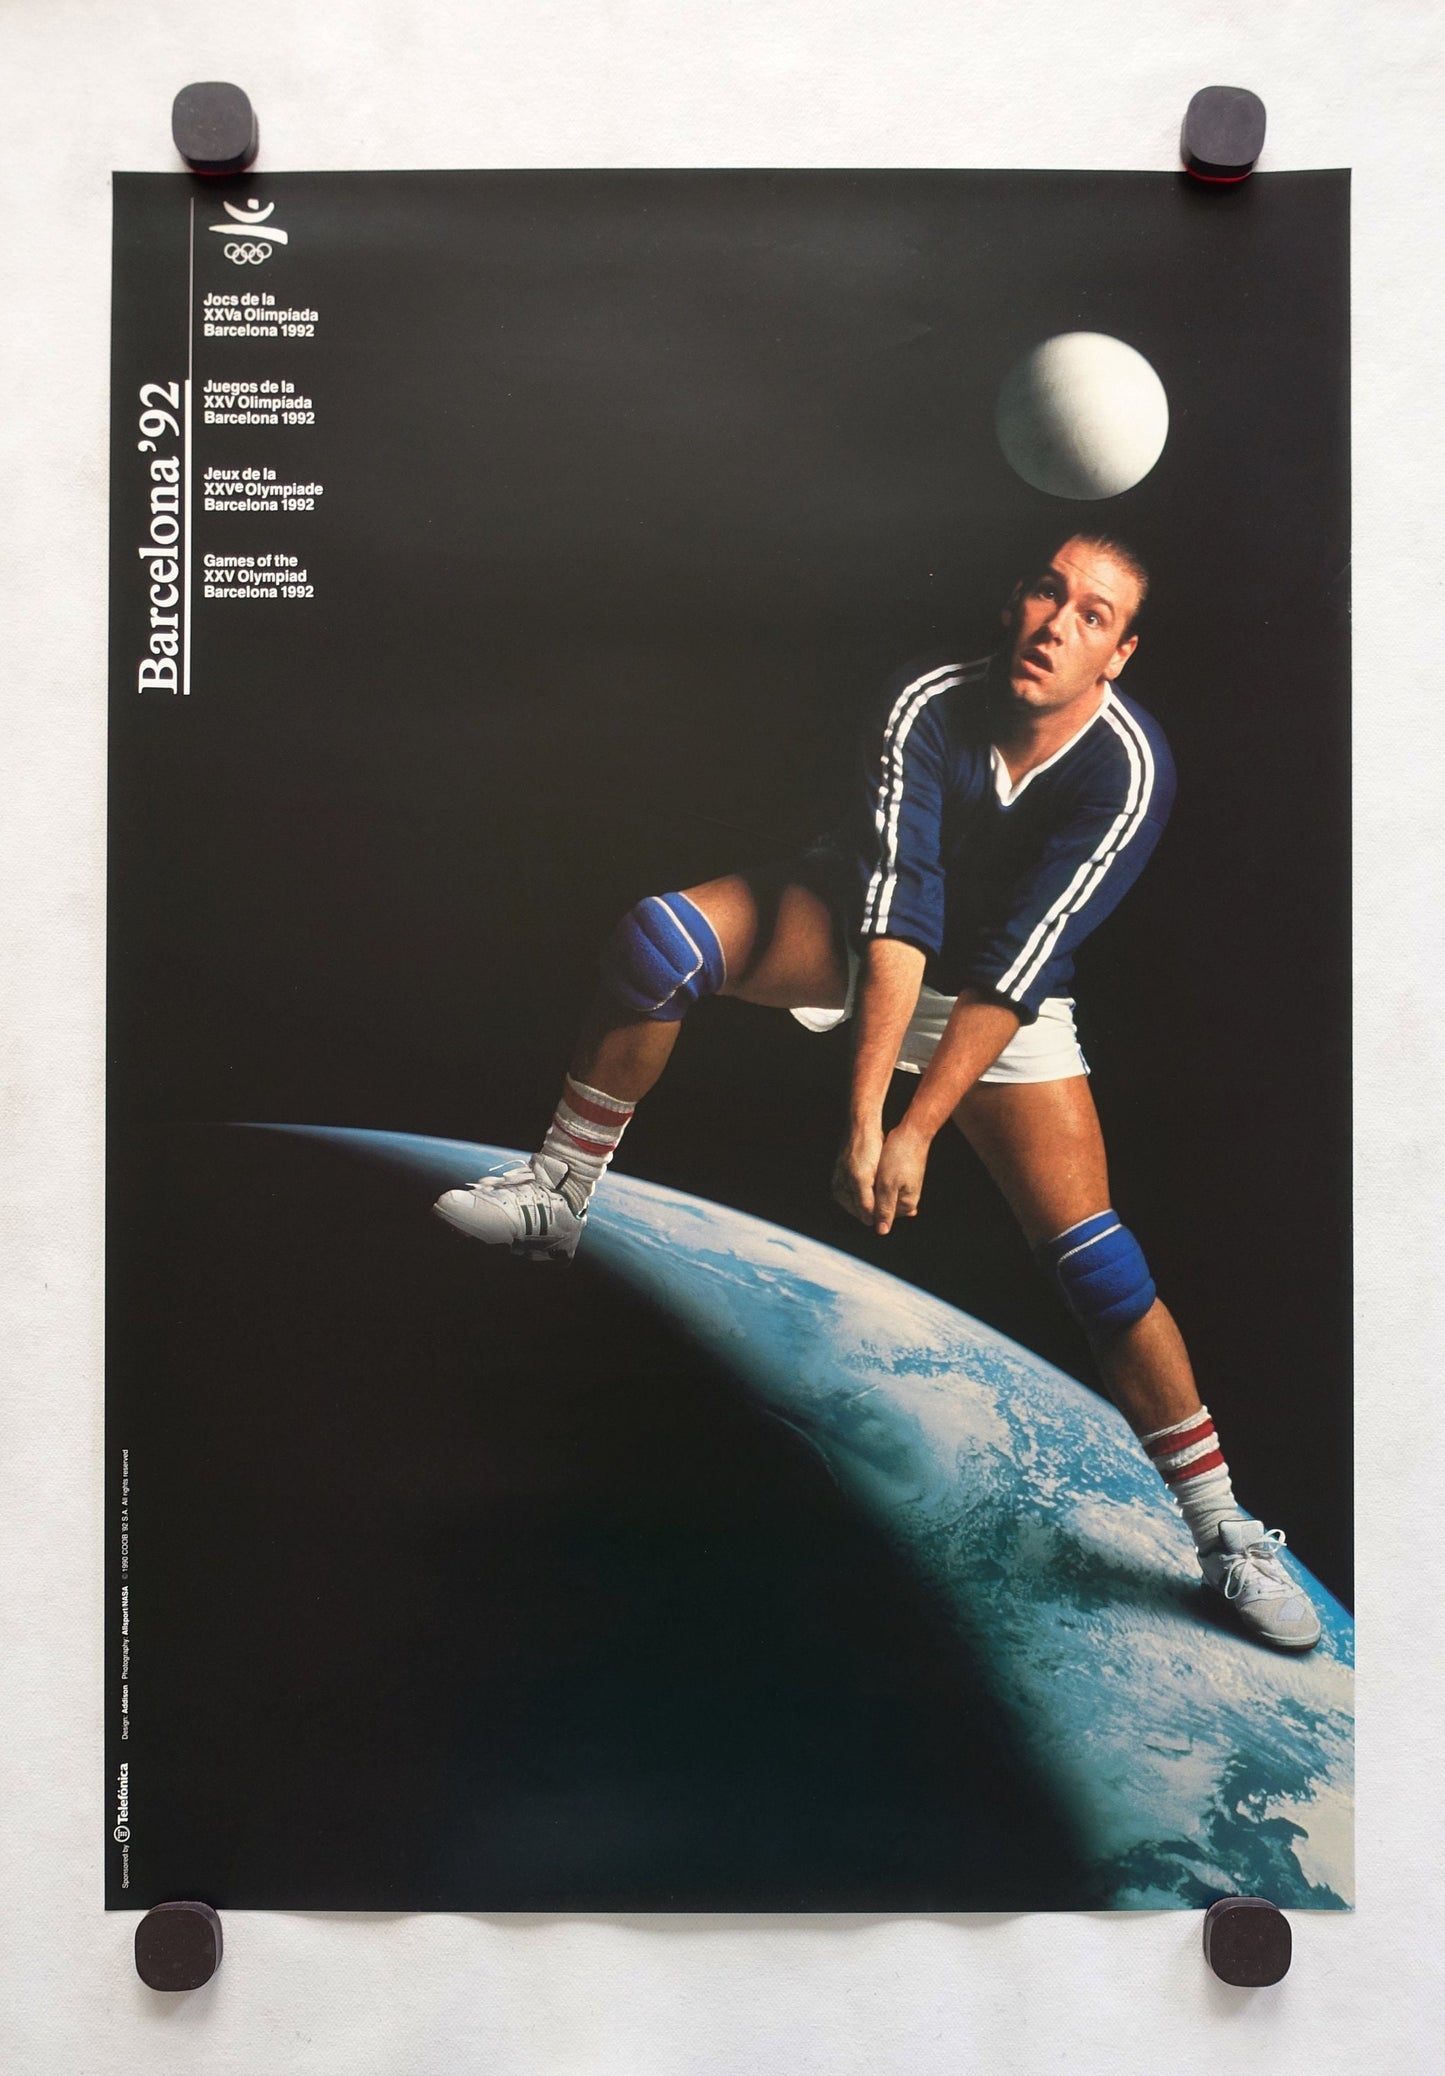 1992 Summer Olympic Games Barcelona Volleyball - Original Vintage Poster